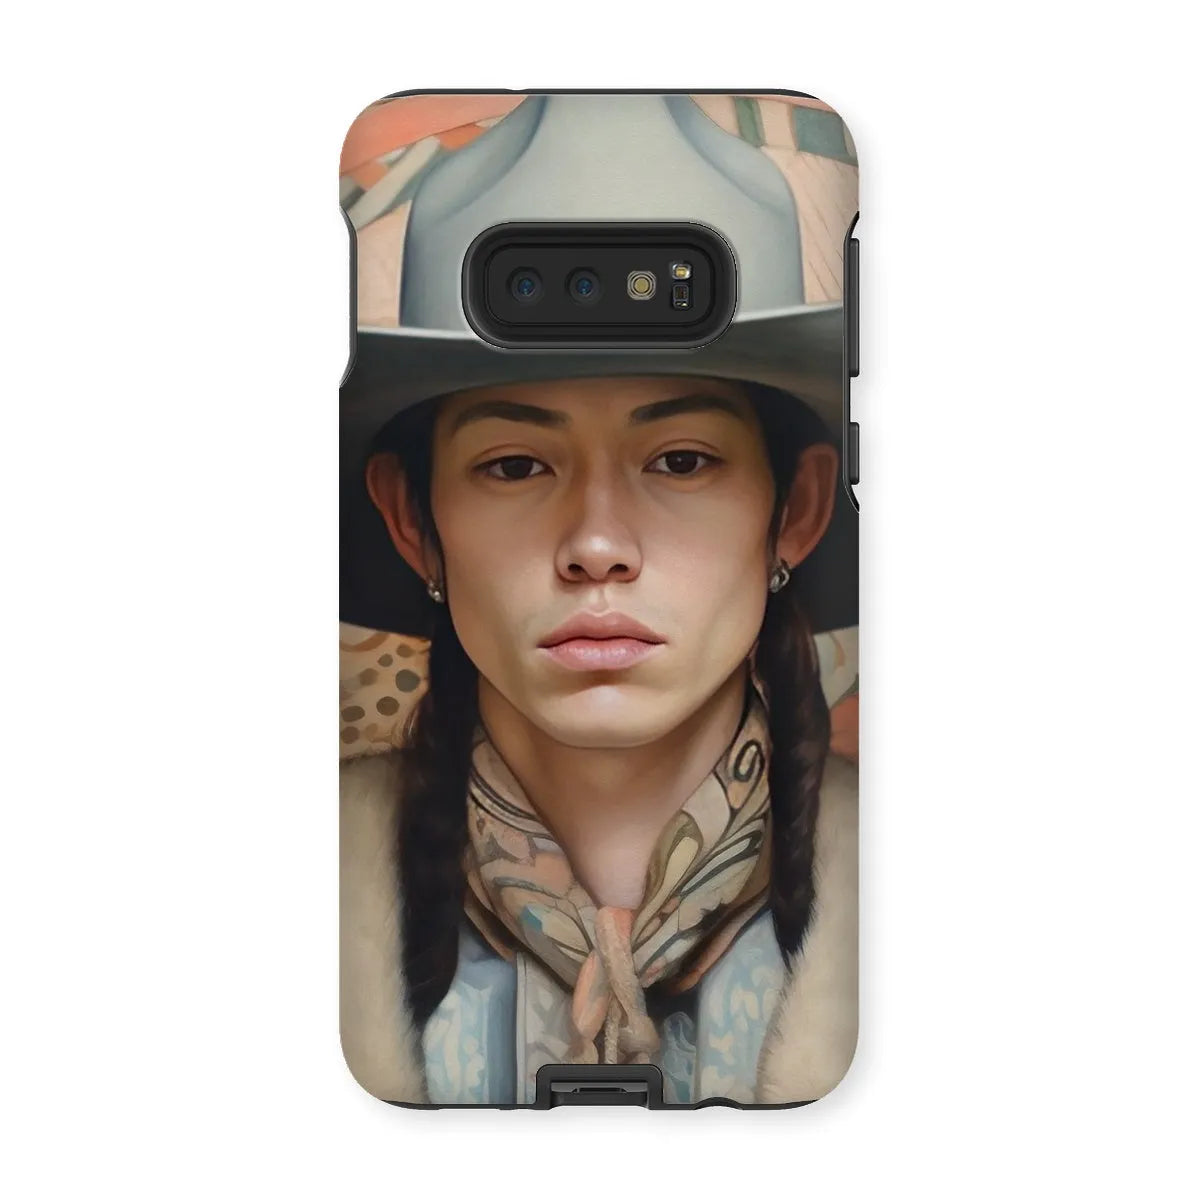 Jacy The Gay Cowboy - Dandy Gay Aesthetic Art Phone Case - Samsung Galaxy S10e / Matte - Mobile Phone Cases - Aesthetic